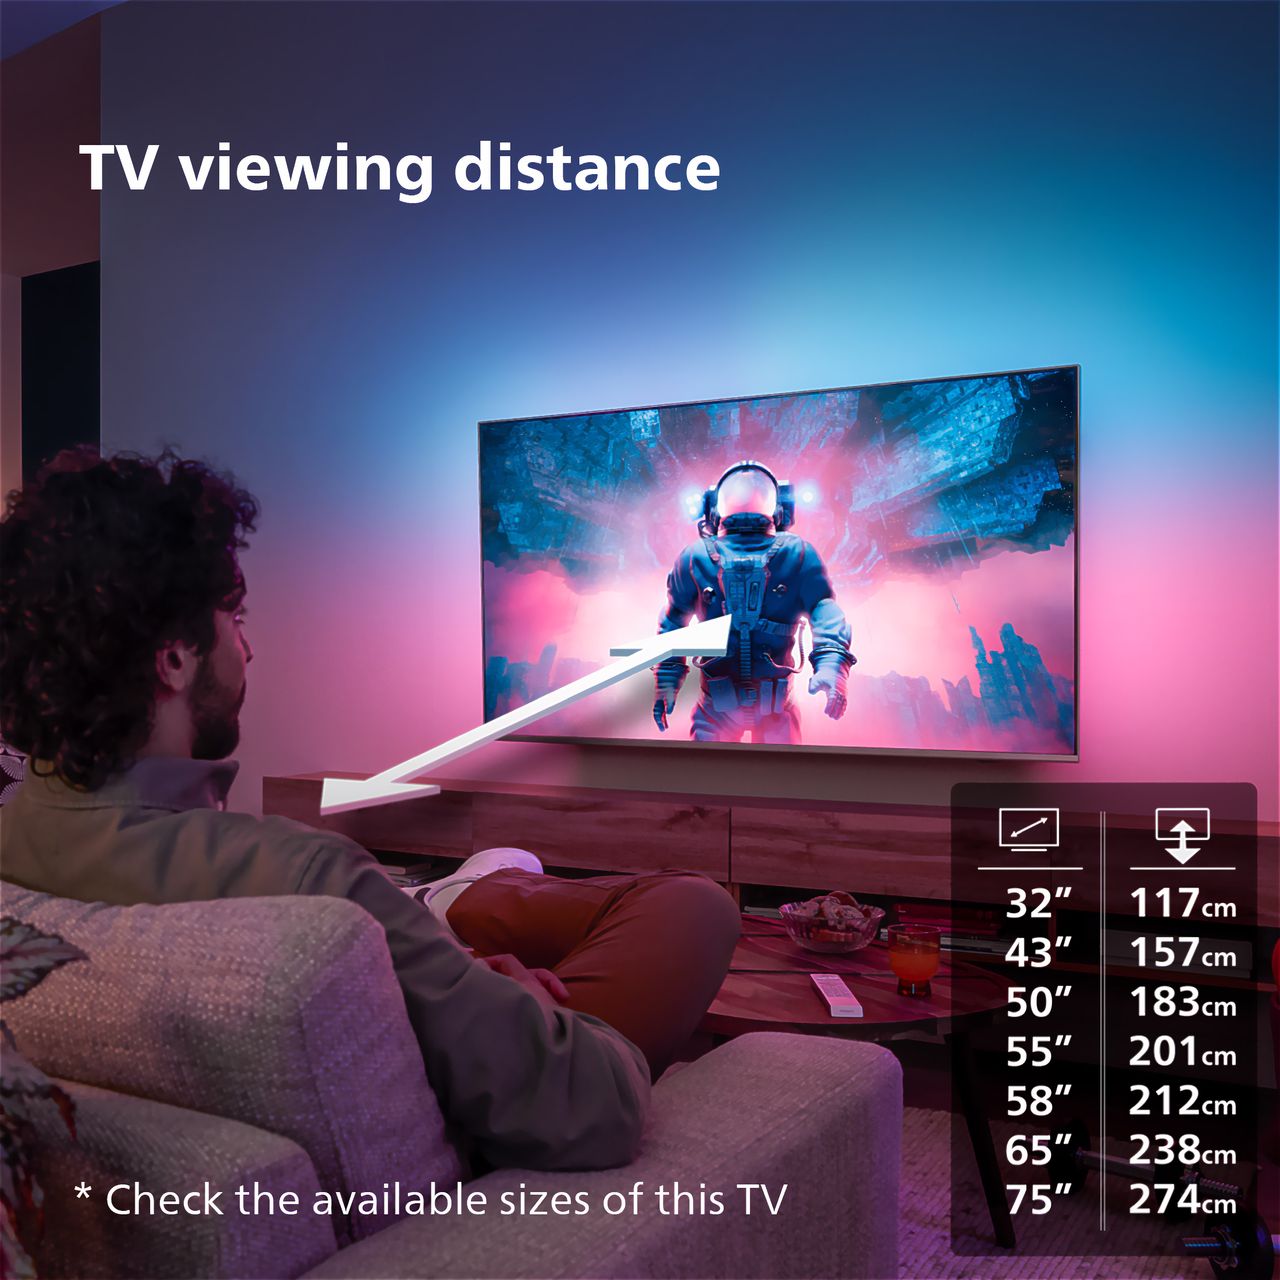 The Ambilight TV of Philips with dynamic surround light.